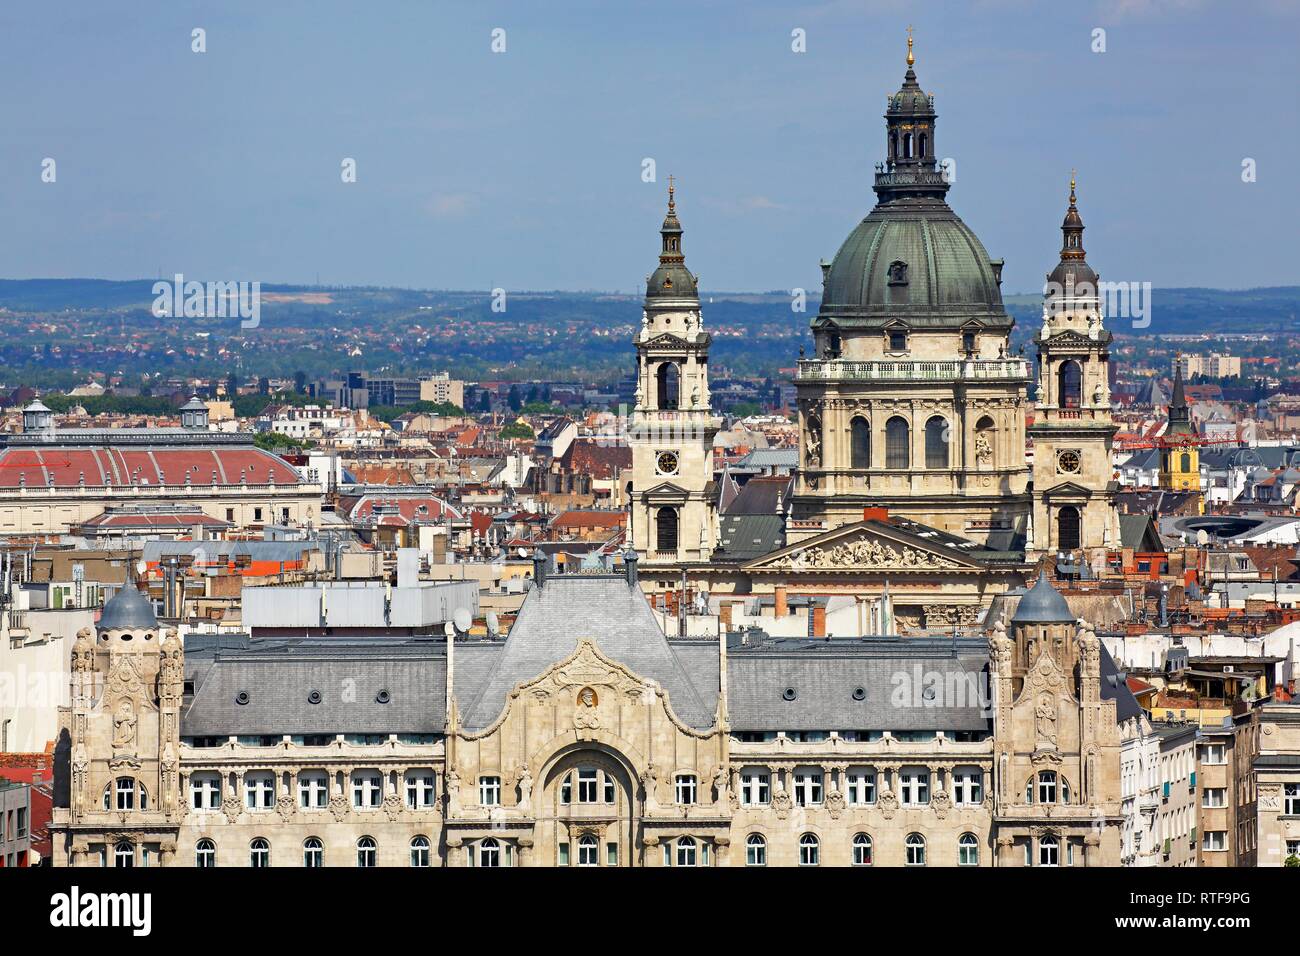 City view with Gresham Palace and St. Stephen's Basilica, Pest district, Budapest, Hungary Stock Photo